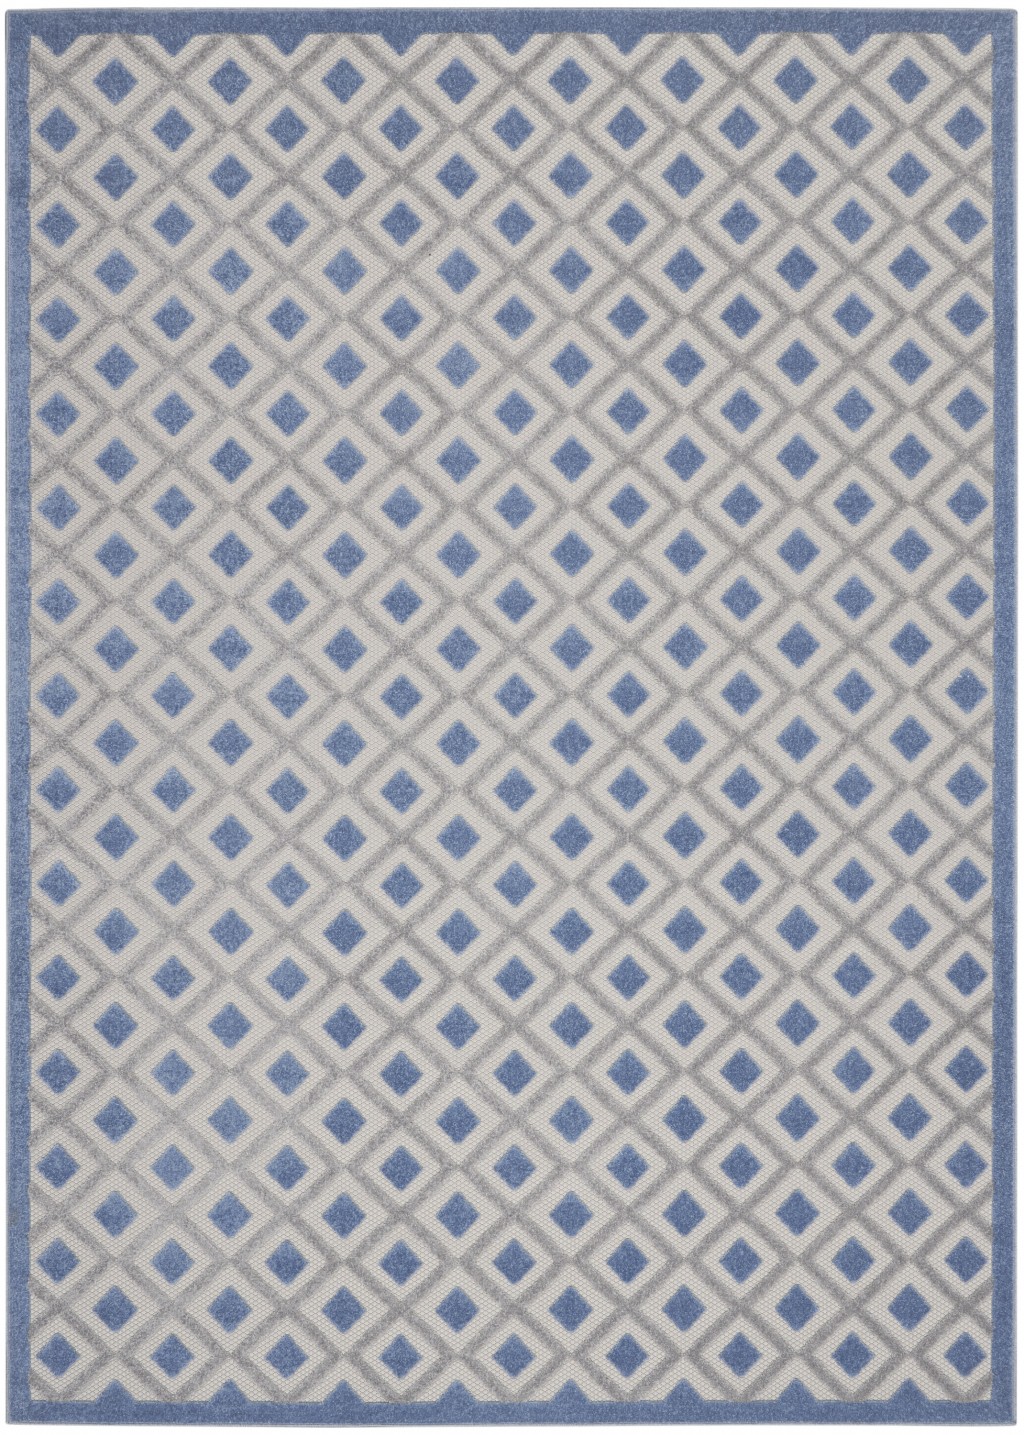 8' X 11' Blue And Gray Geometric Indoor Outdoor Area Rug-385160-1